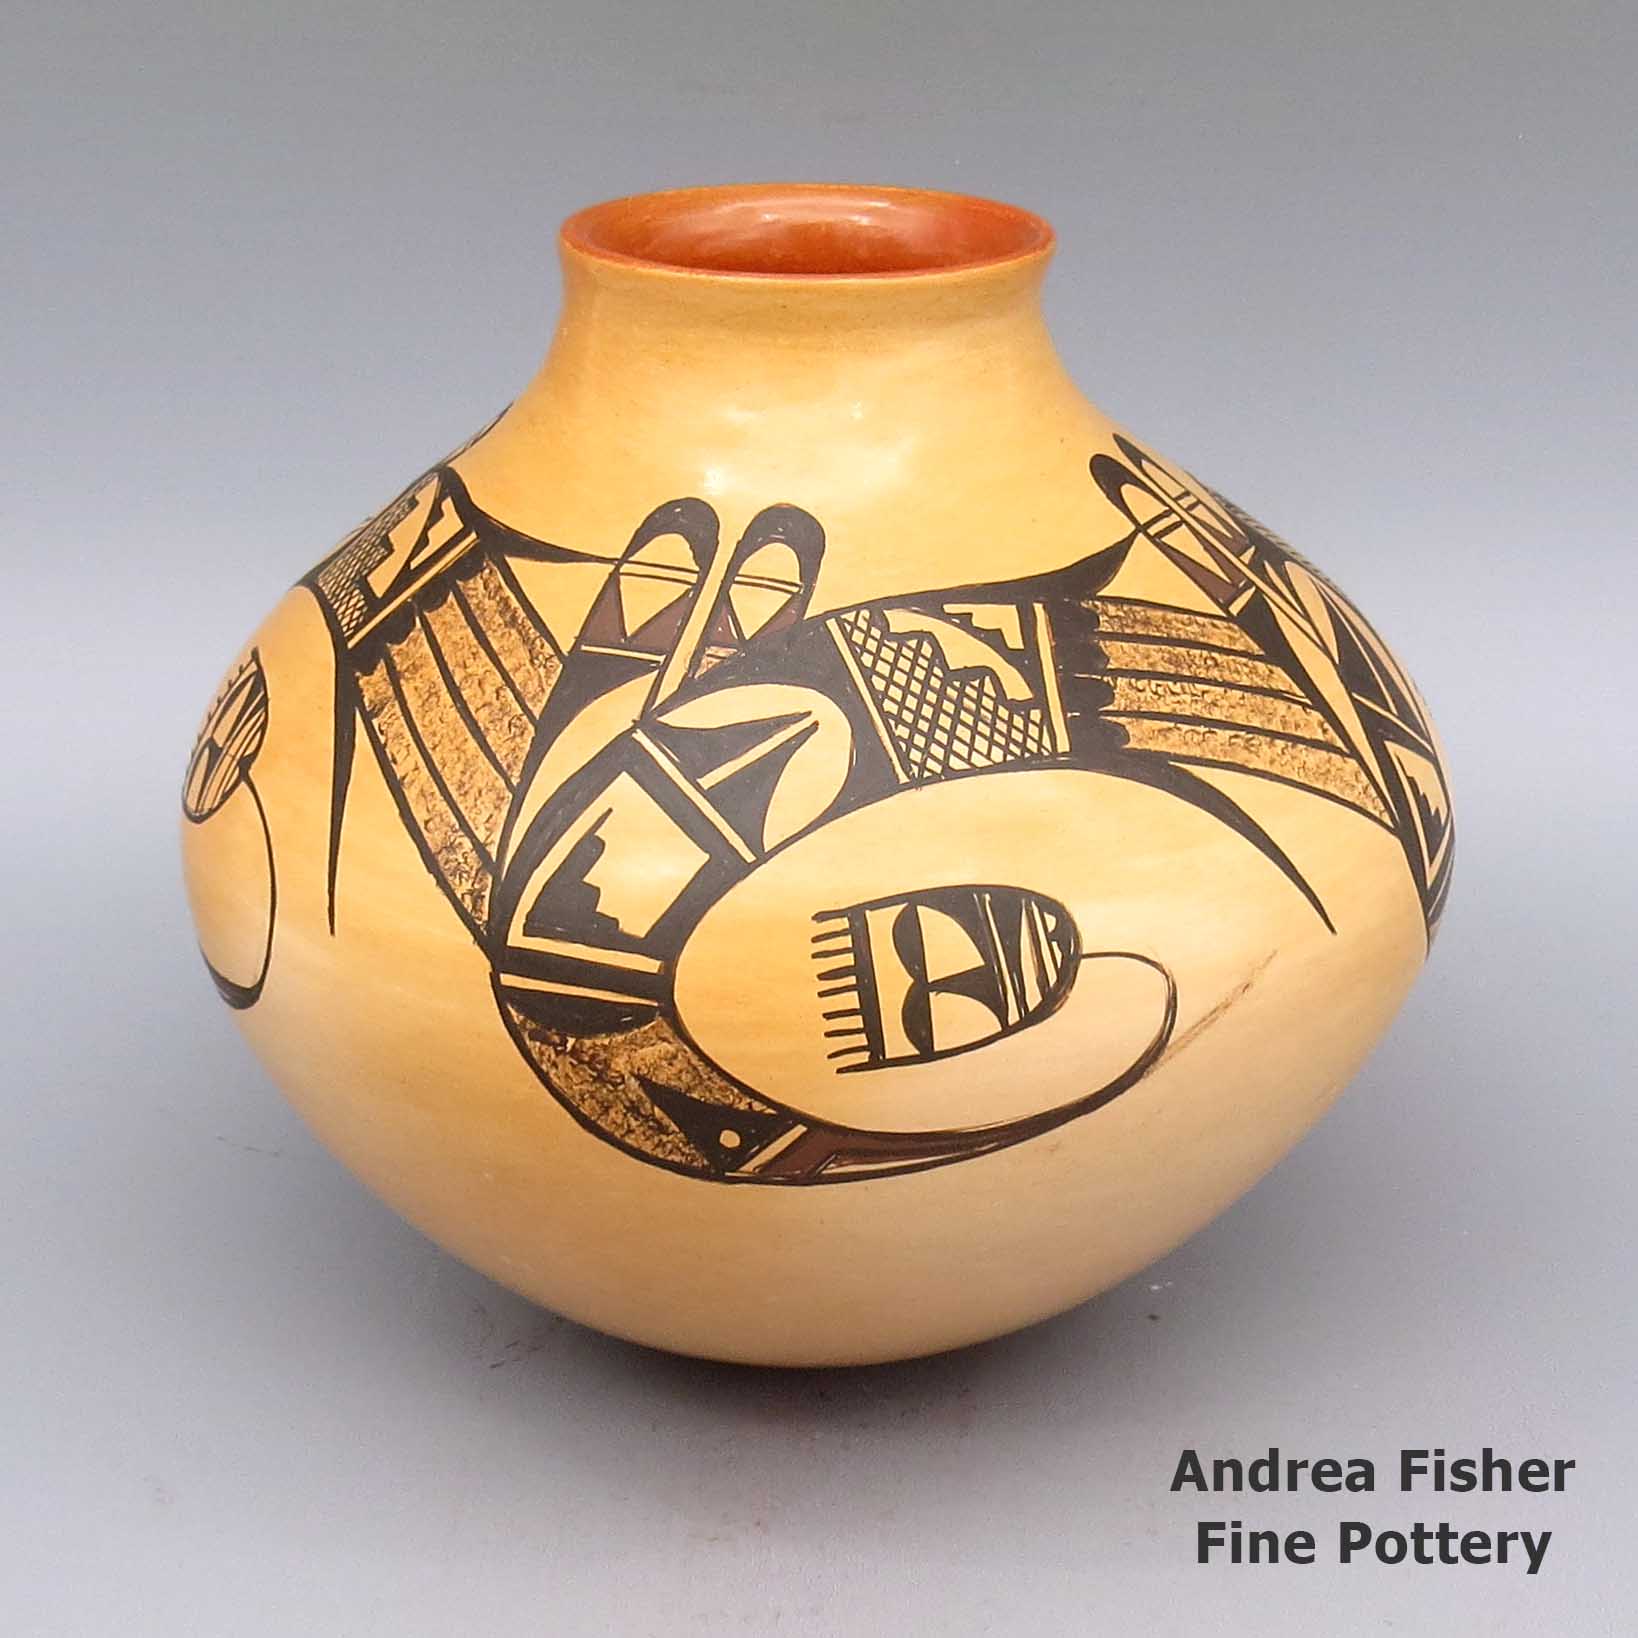 Polychrome jar with geometric design and fire clouds made by White Swann of Hopi